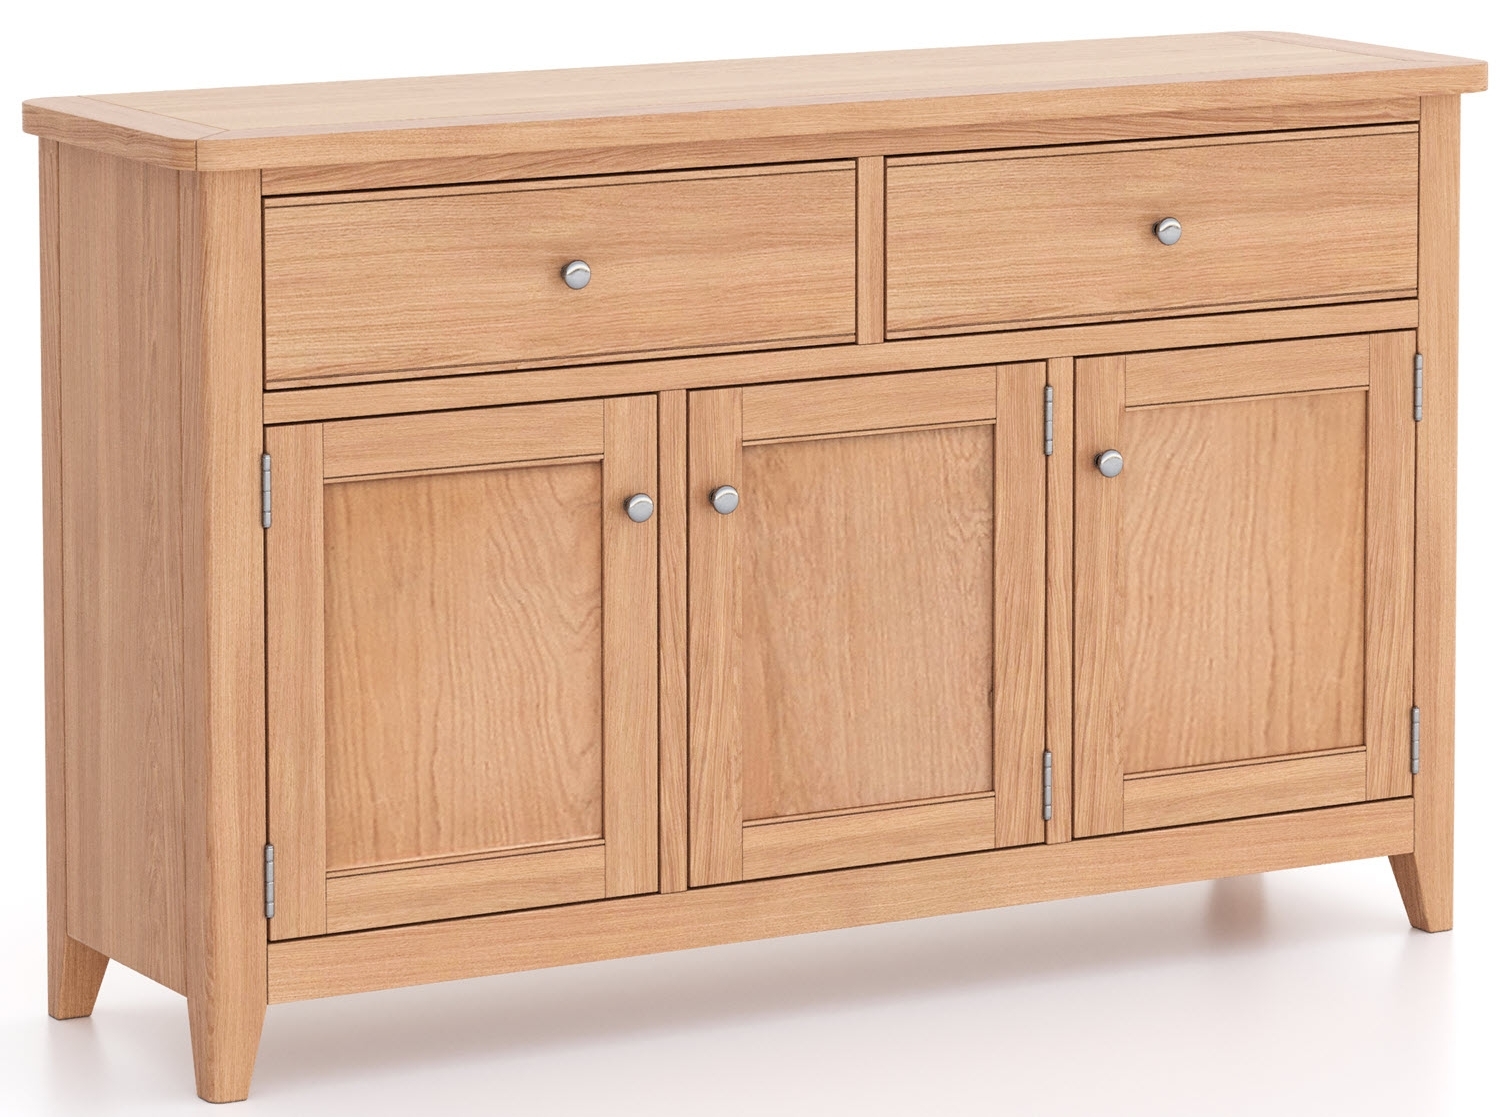 Arden Sideboard 130cm With 3 Doors And 2 Drawers